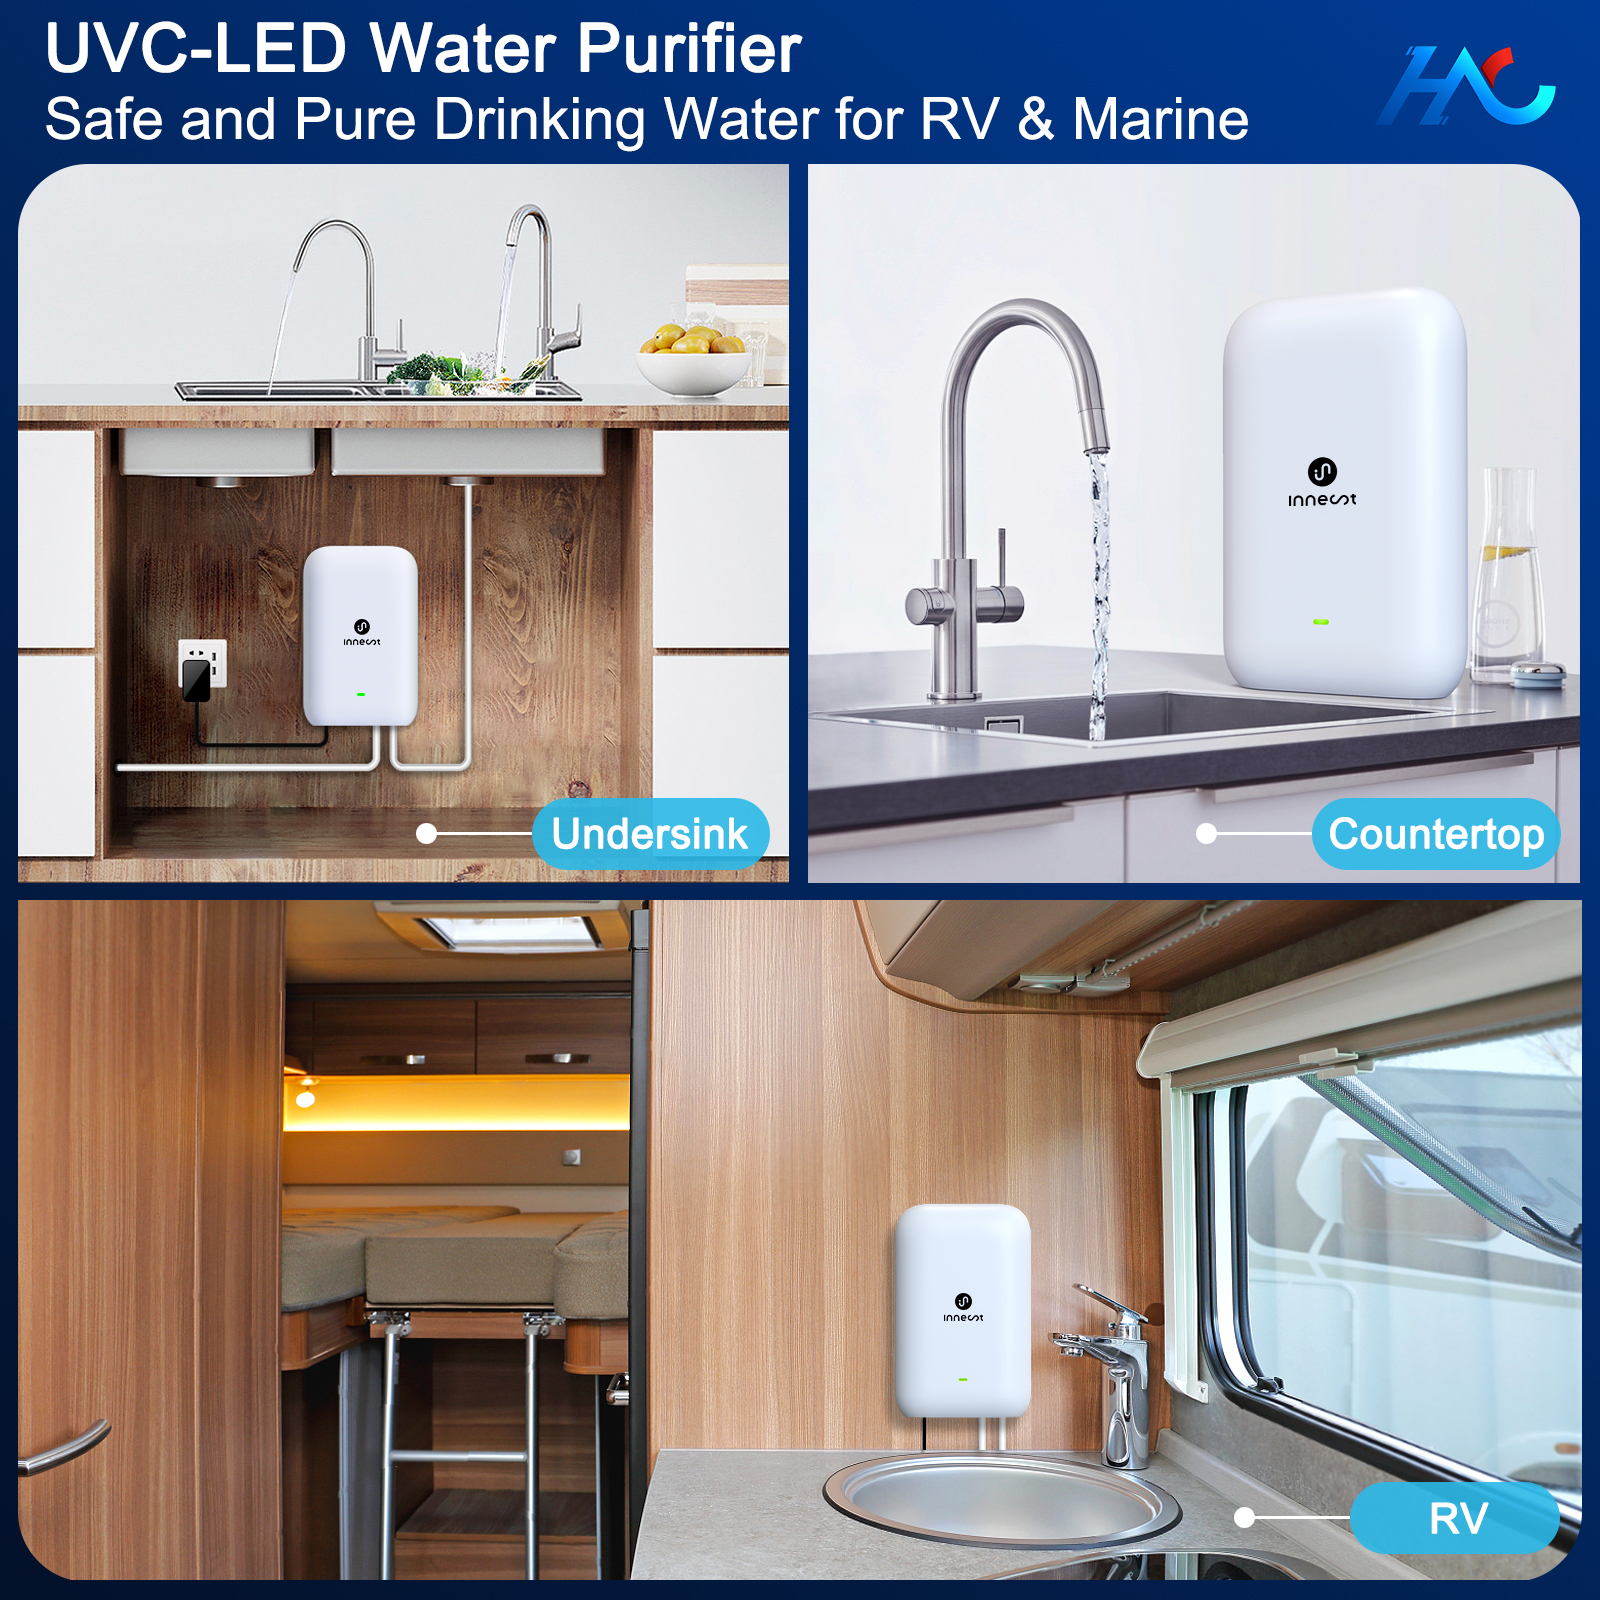 Is it really necessary to add ultraviolet germicidal water purifier to water filter?